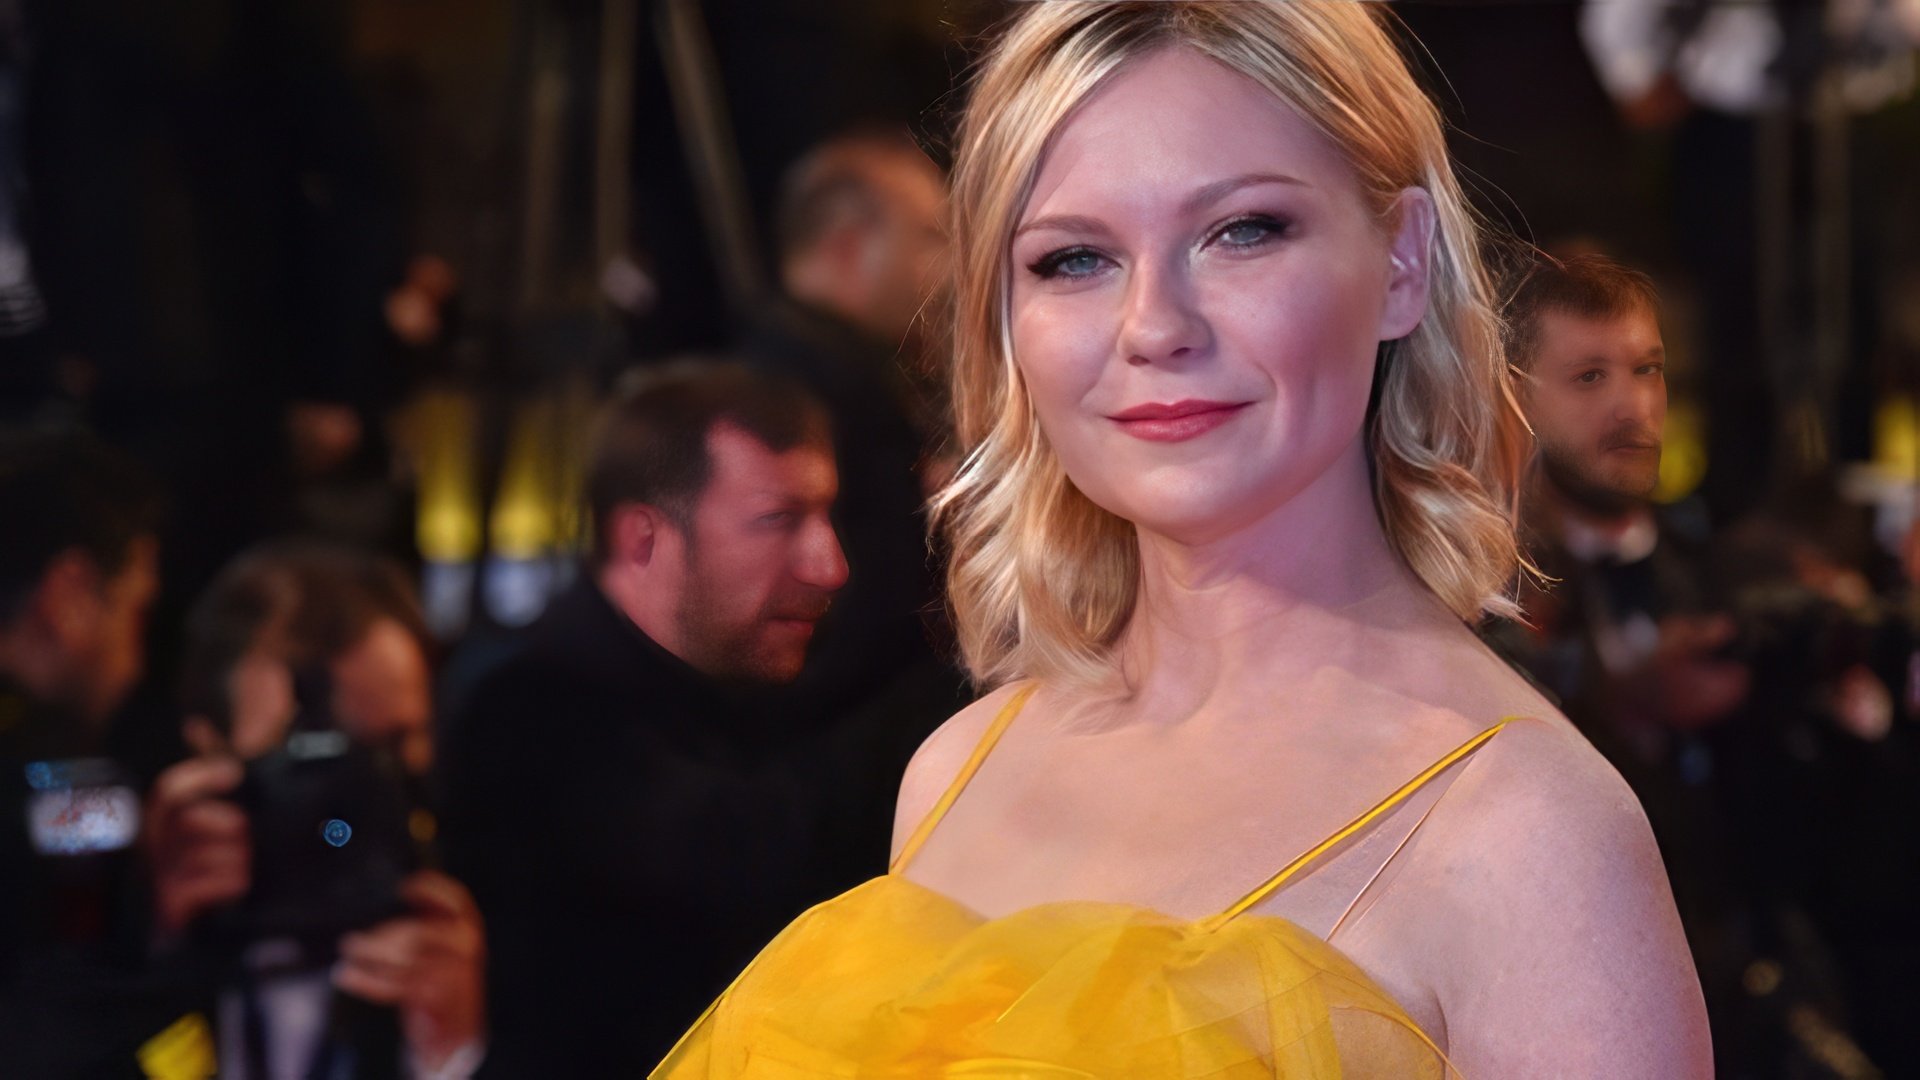 Kirsten Dunst is not going to stay away from the cameras for a long time